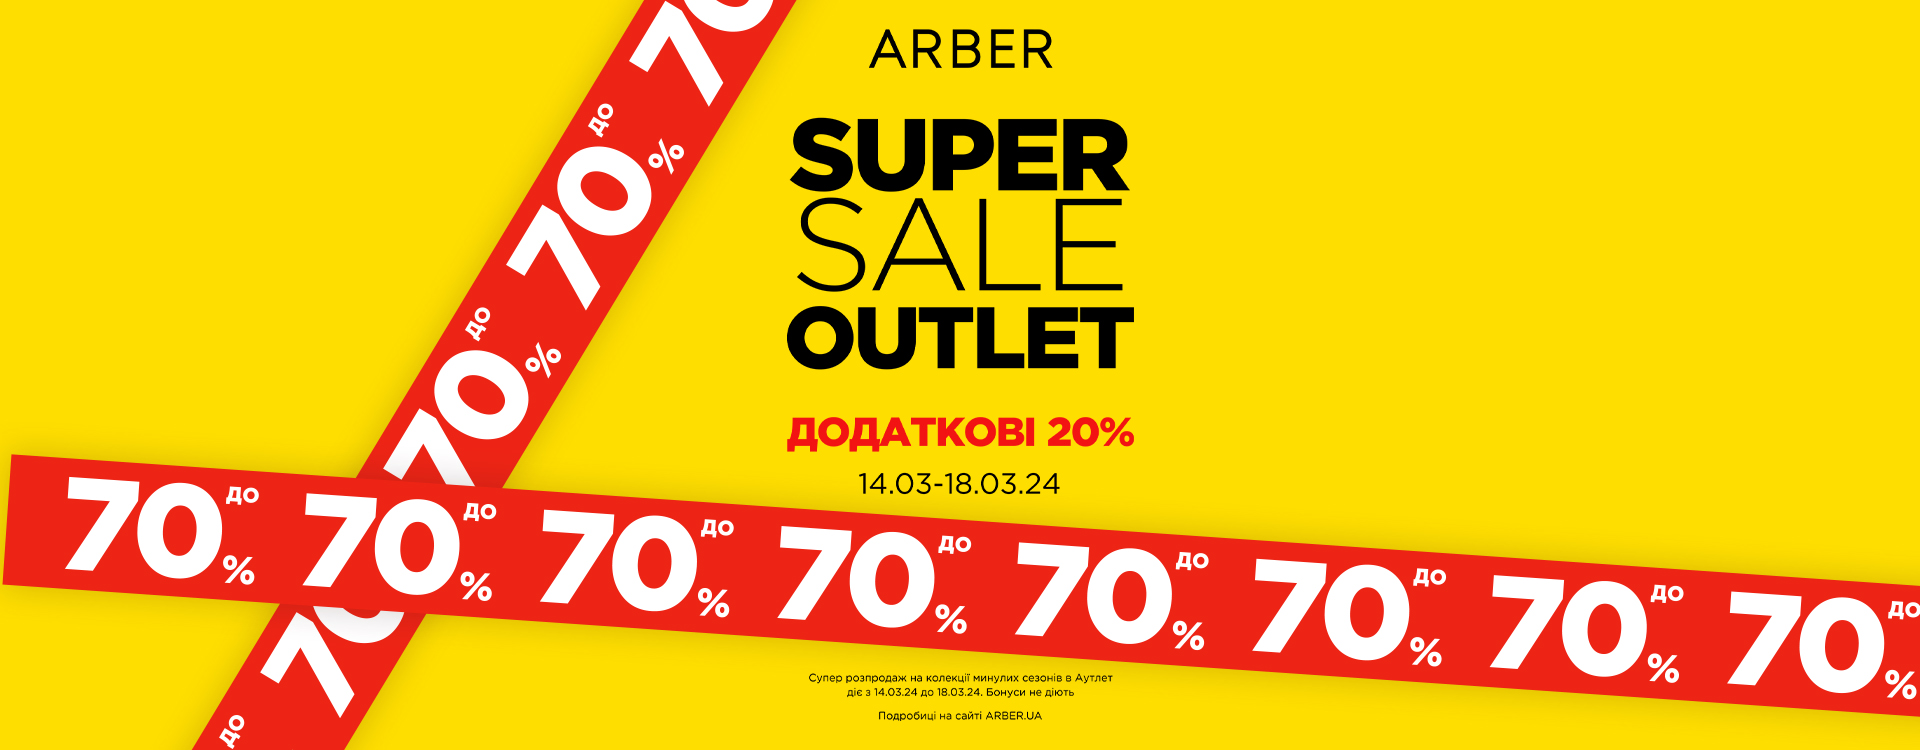 Discounts up to -80% on the Outlet collection